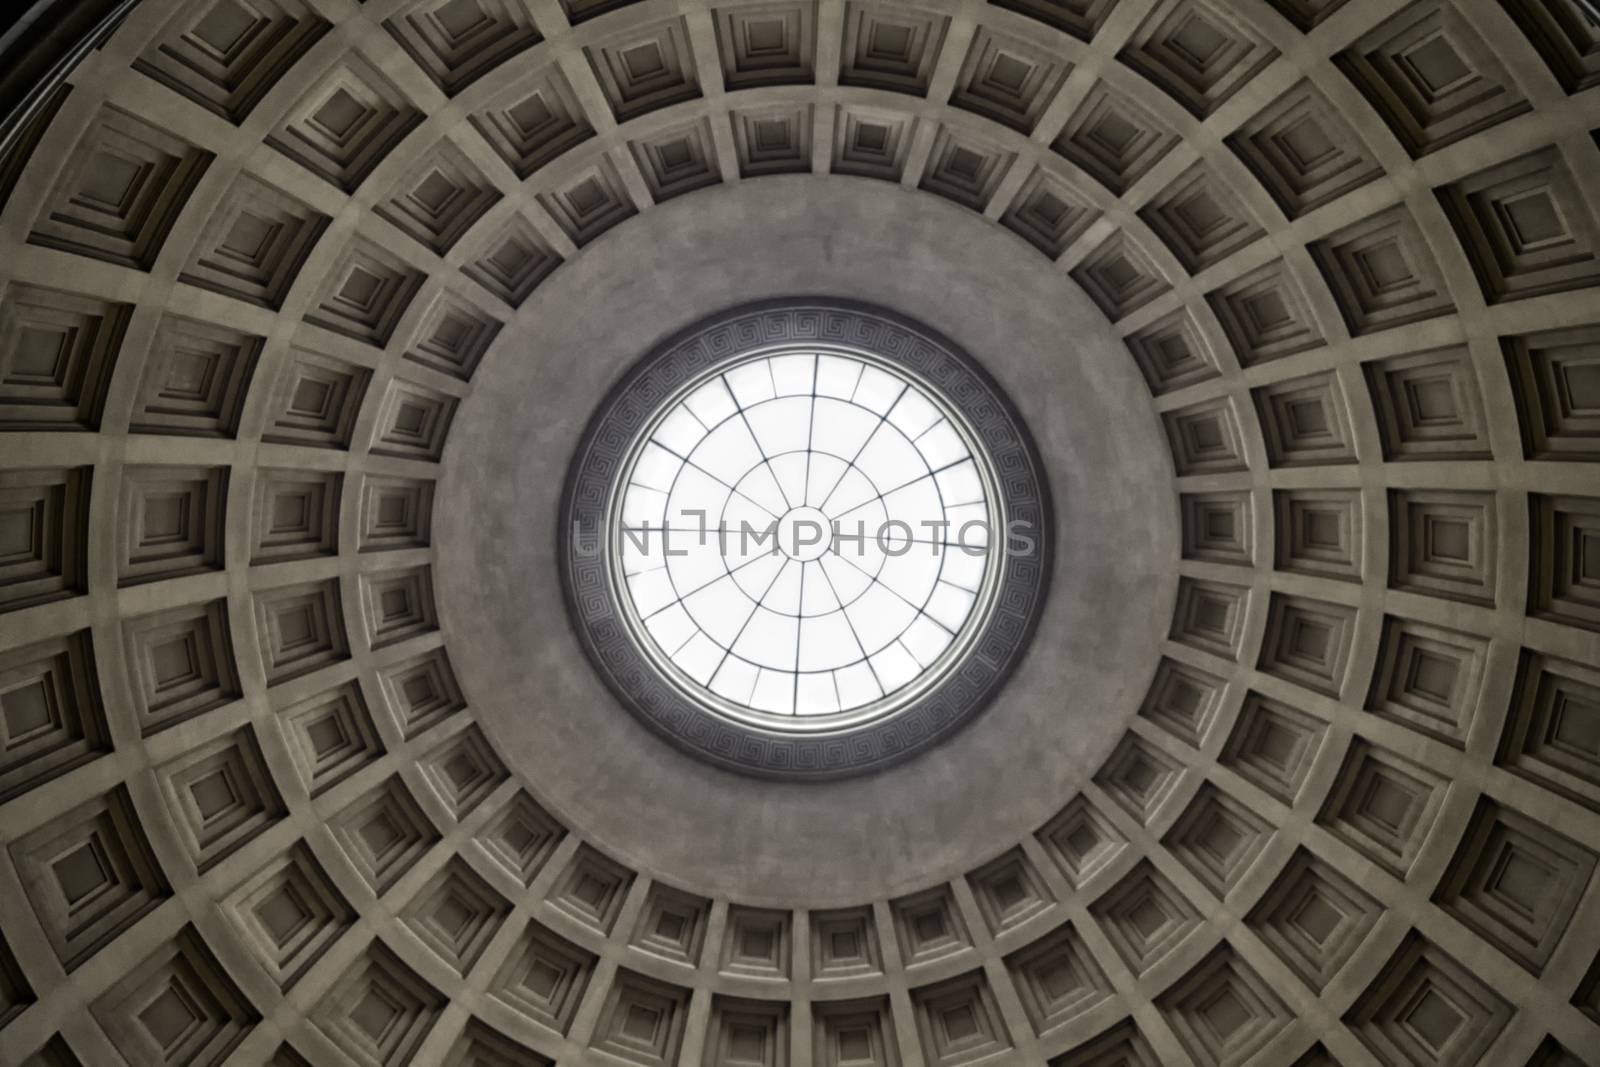 Historic dome underside with glass oculus in the center